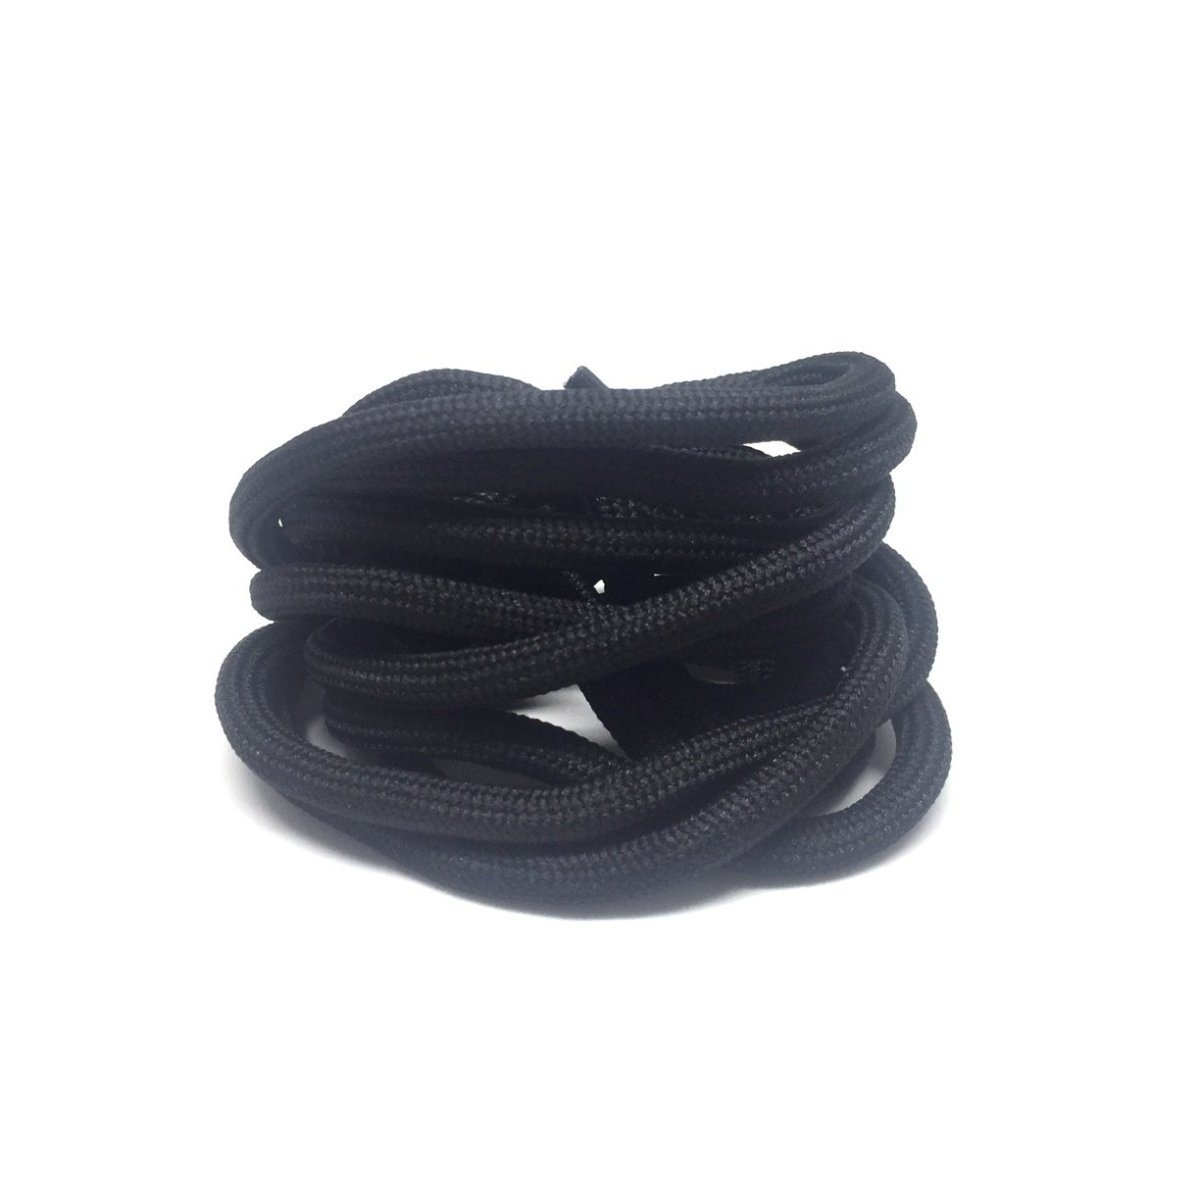 New 45" 350 triple black rope LACES WITH SLVR TIPS boost bred boost 